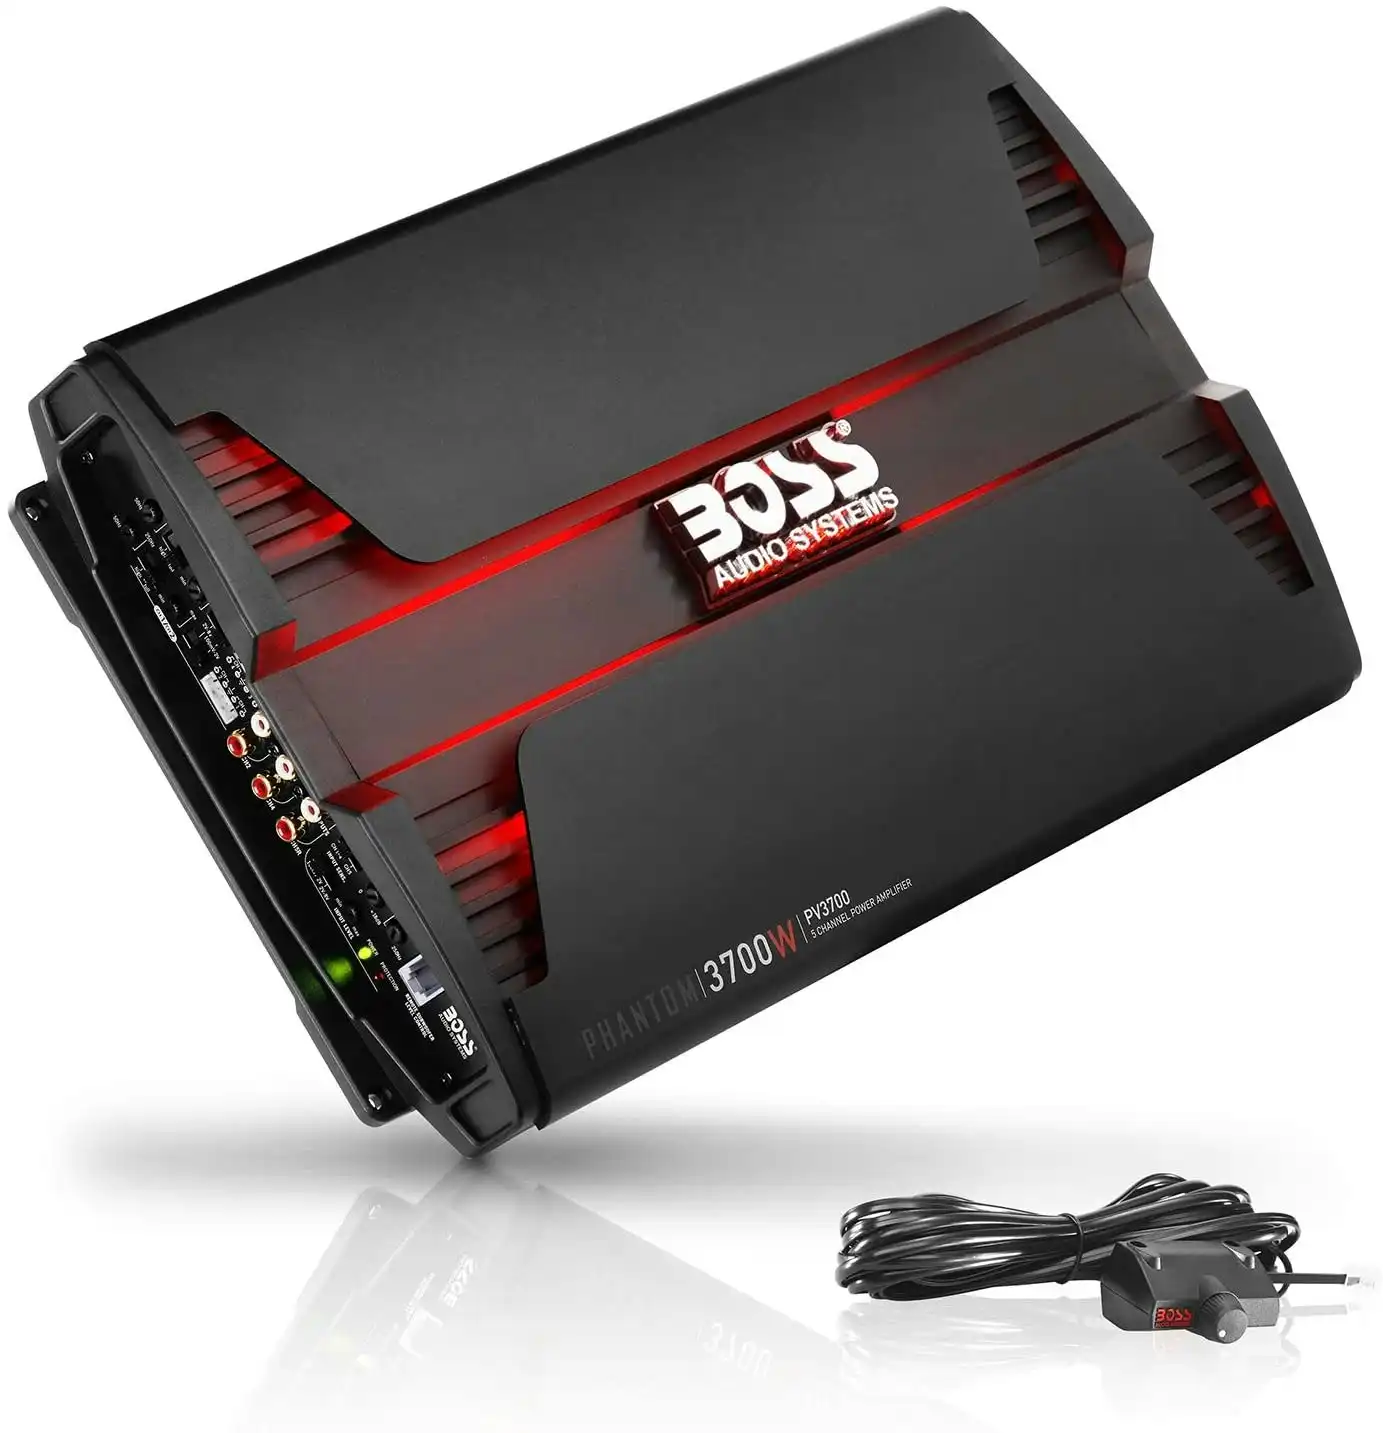 Boss Audio Systems PV3700 5 Channel Car Amplifier - 3700 Watts, Full Range, Class A-B, 2-4 Ohm Stable, Mosfet Power Supply, Bridgeable, Remote